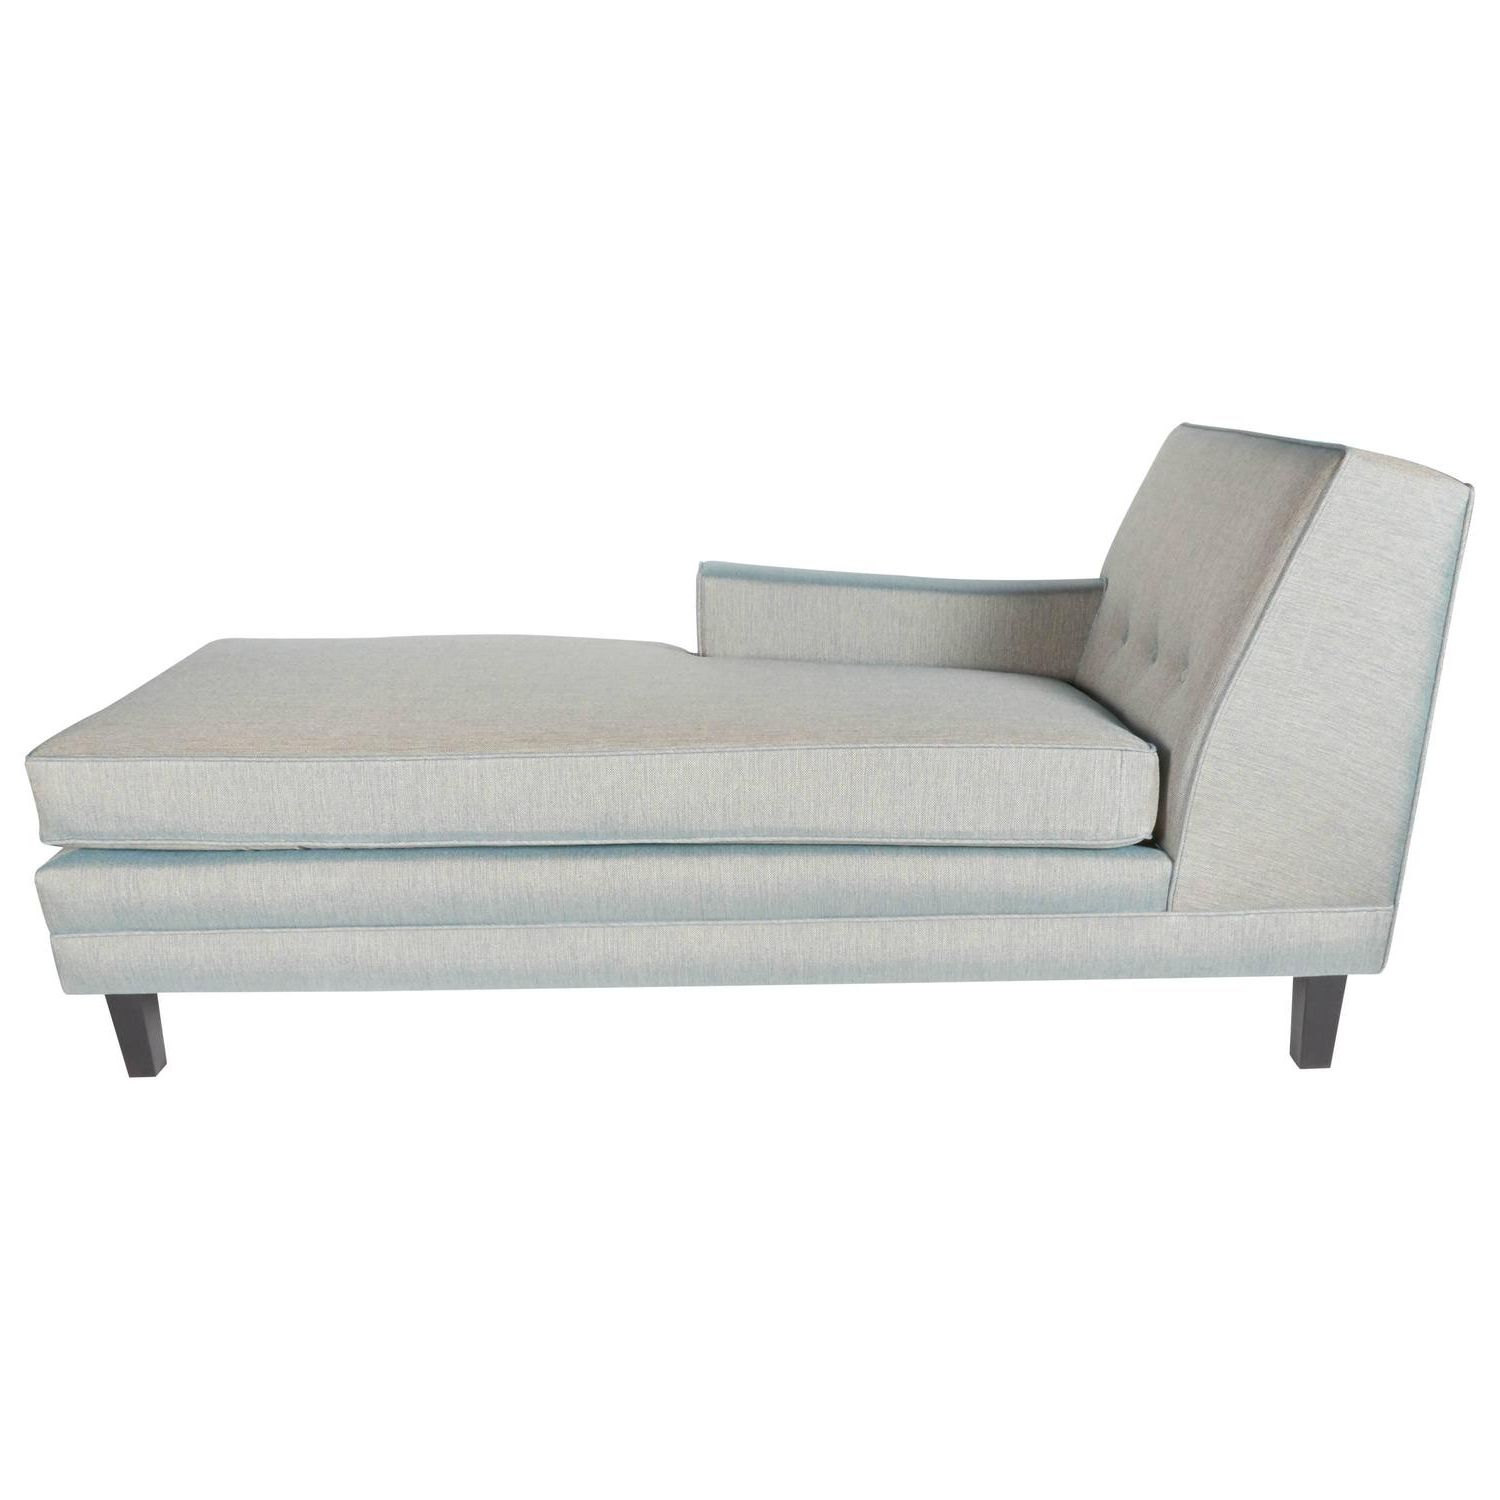 Preferred Mid Century Modern Chaise Lounge With Low Profile Design At 1stdibs For Modern Chaise Lounges (View 1 of 15)